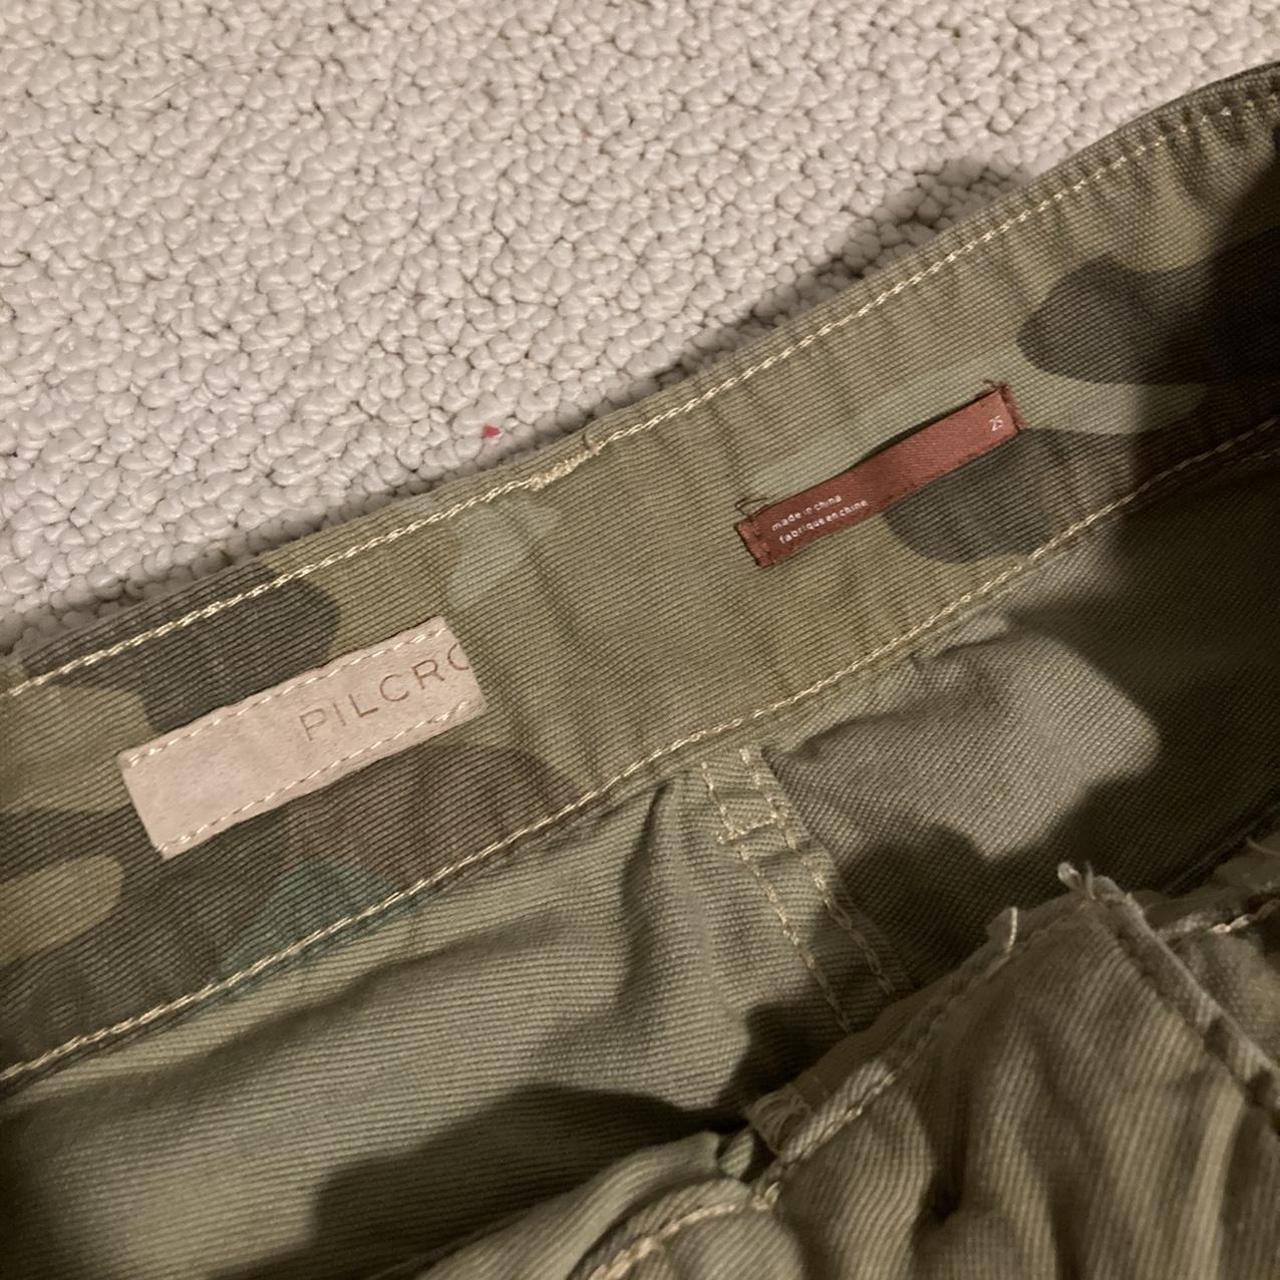 Pilcro mid rise camo pants with a pink detailing. - Depop